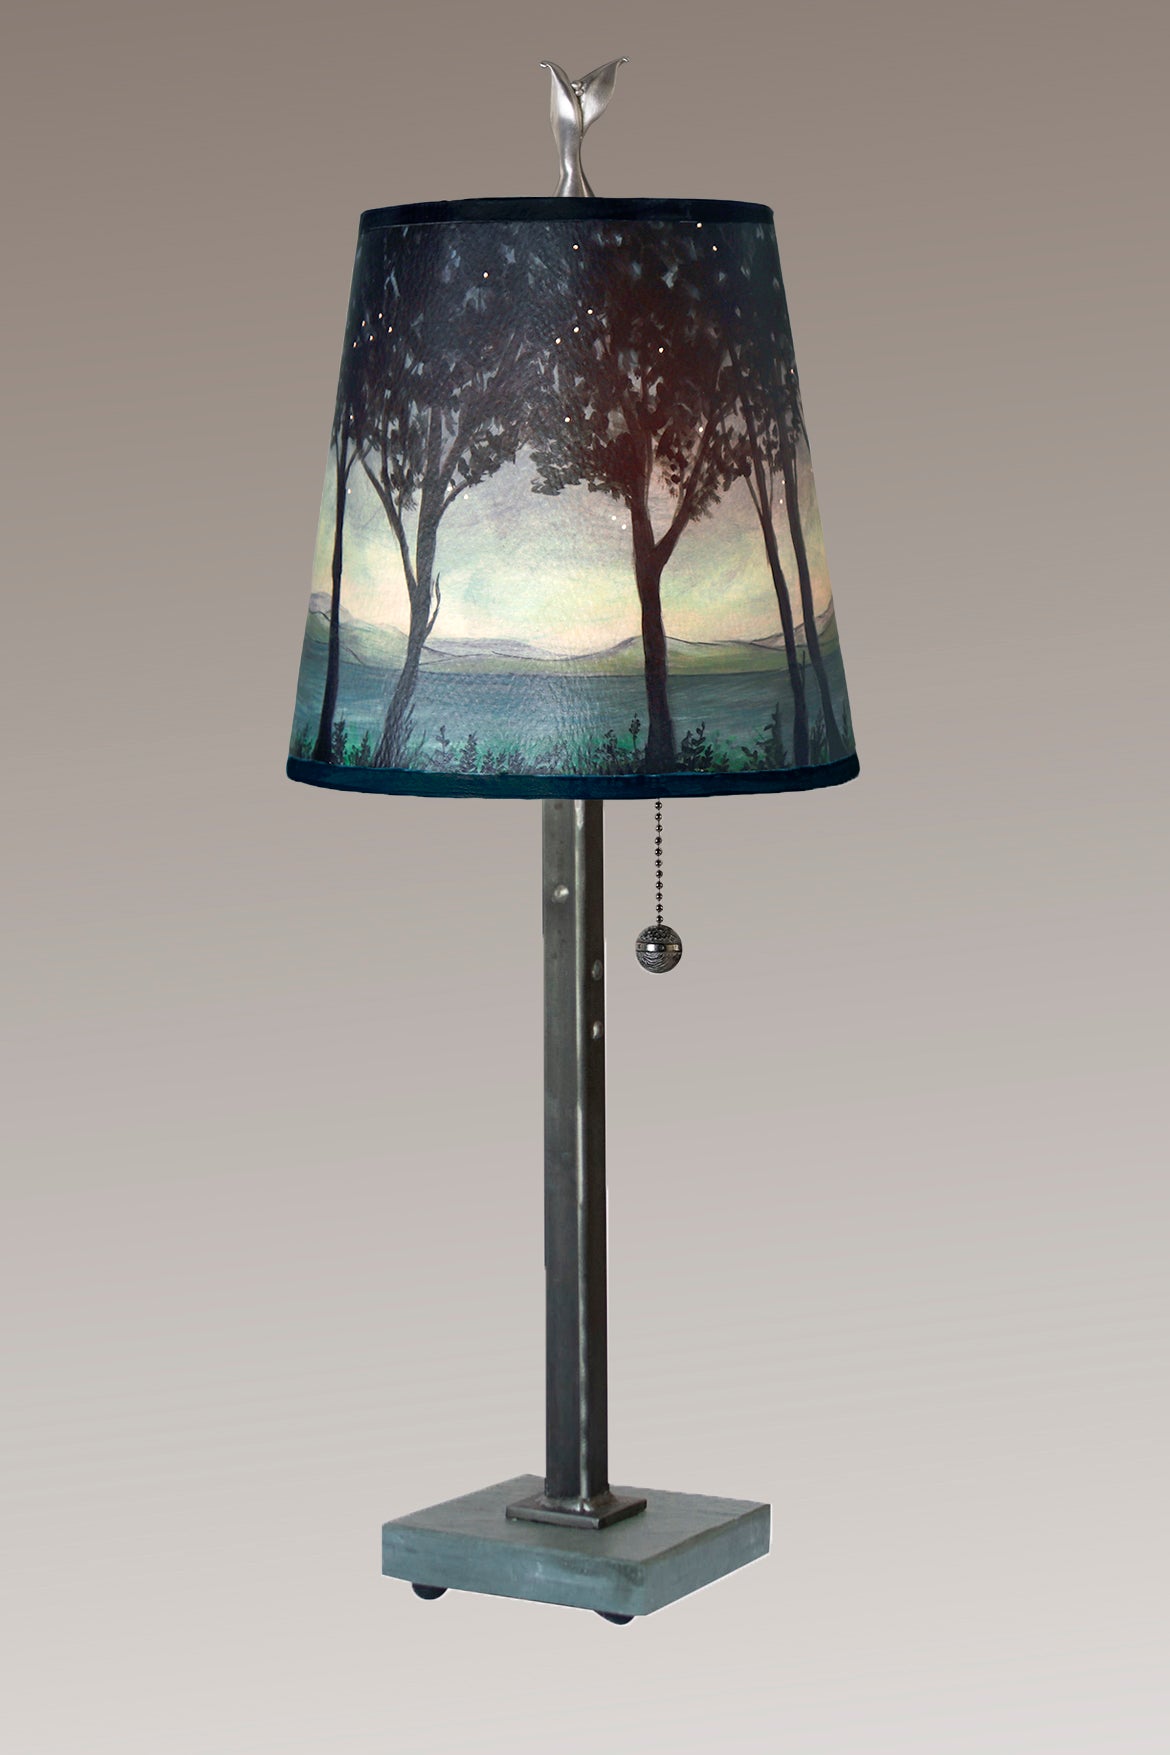 Steel Table Lamp with Small Drum Shade in Twilight